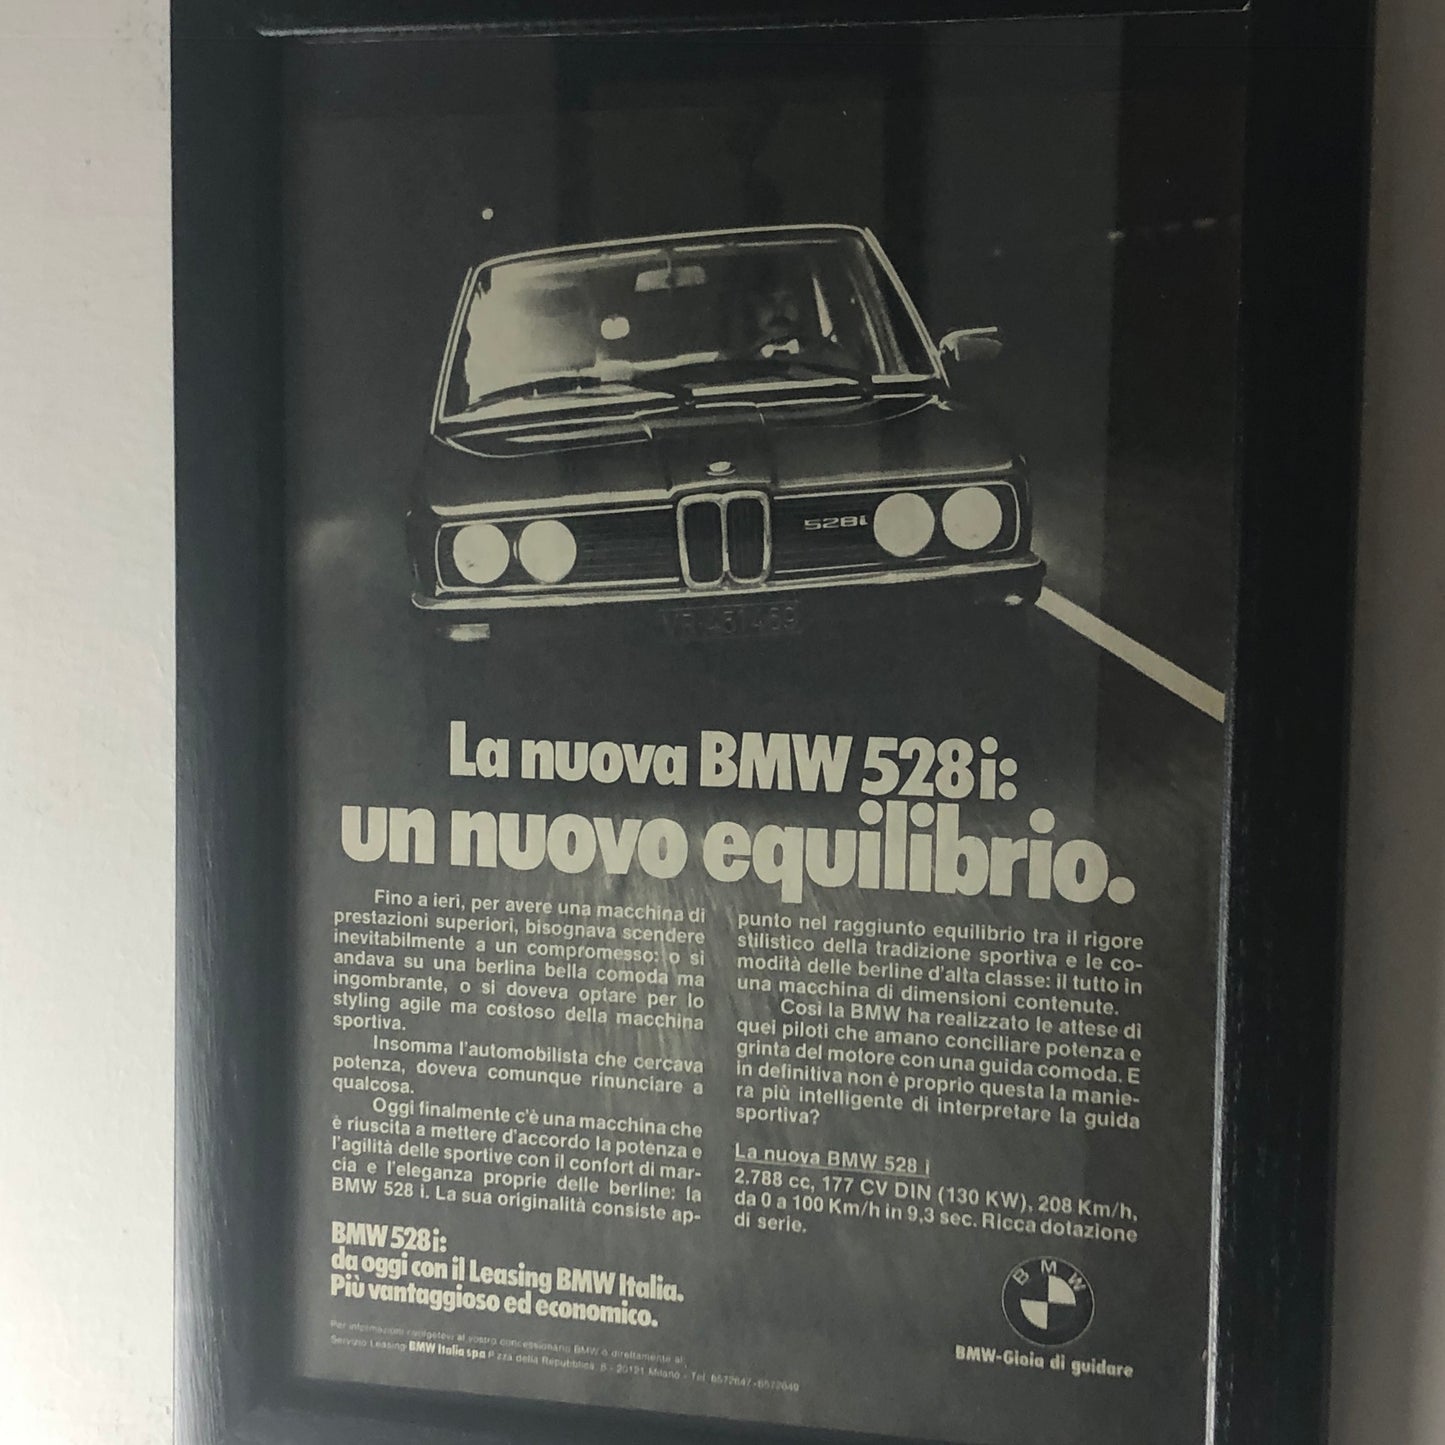 BMW, Advertising Year 1978 the New BMW 528i a New Balance